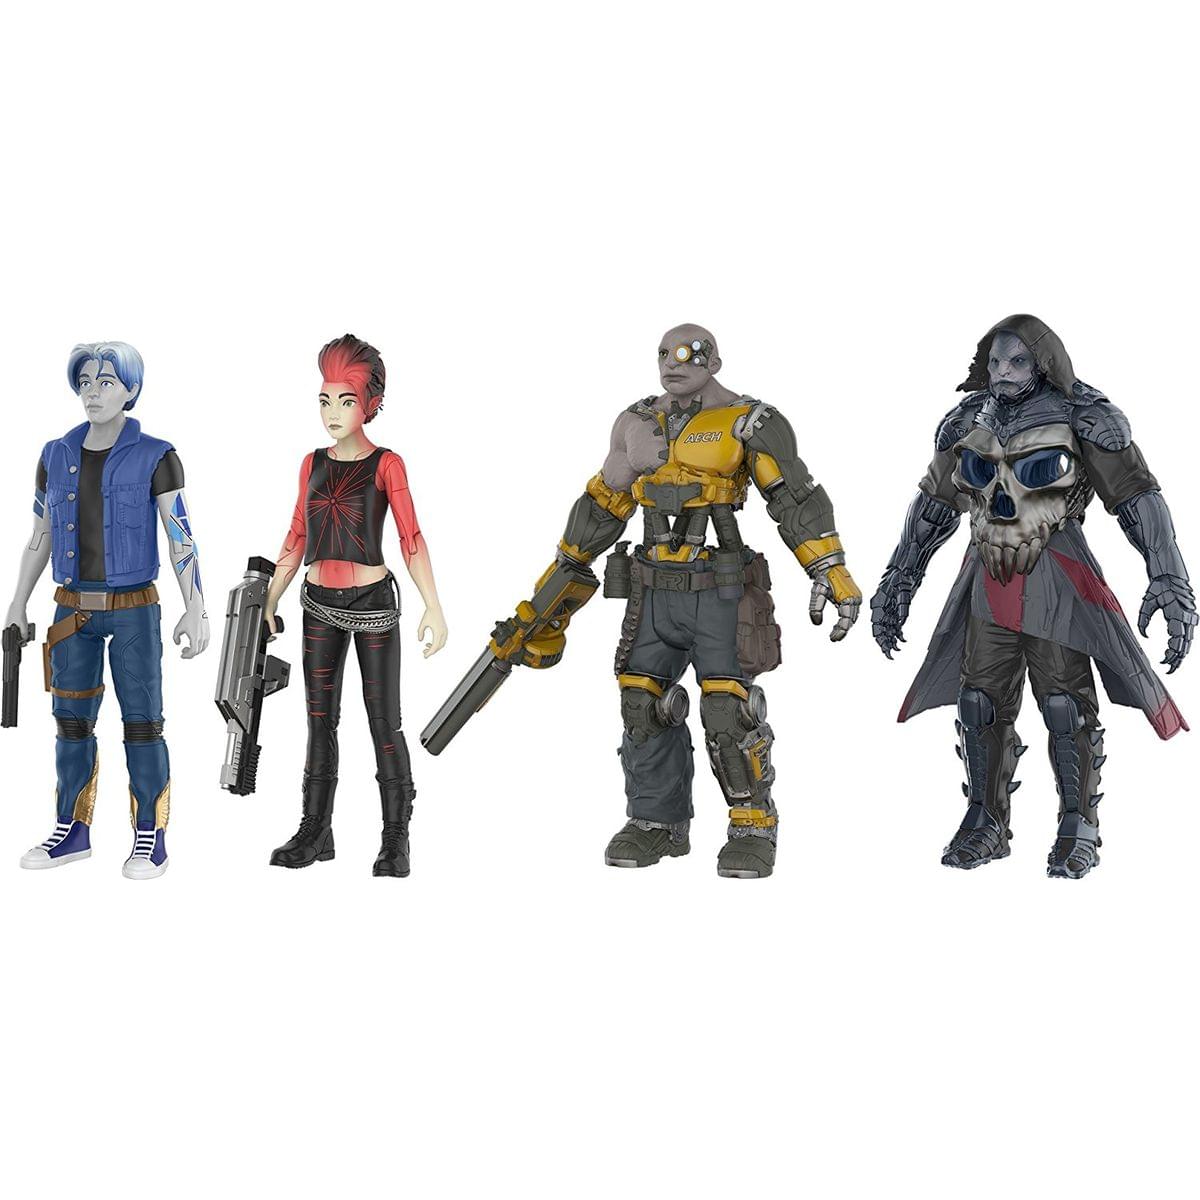 Ready Player One 3 3/4" Action Figure 4-Pack: Parzival, Aech, Art3mis, i-R0k